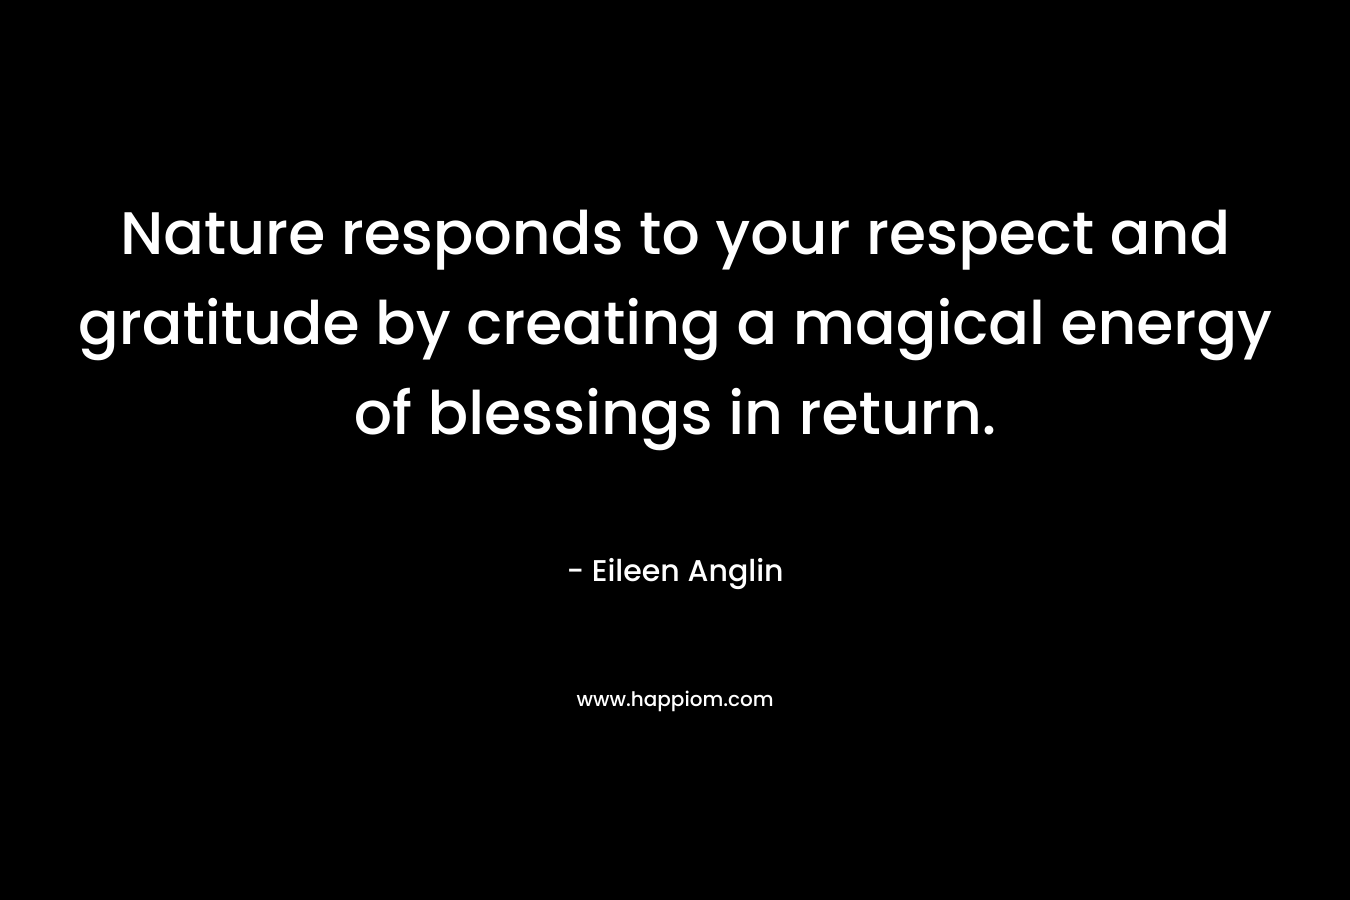 Nature responds to your respect and gratitude by creating a magical energy of blessings in return.